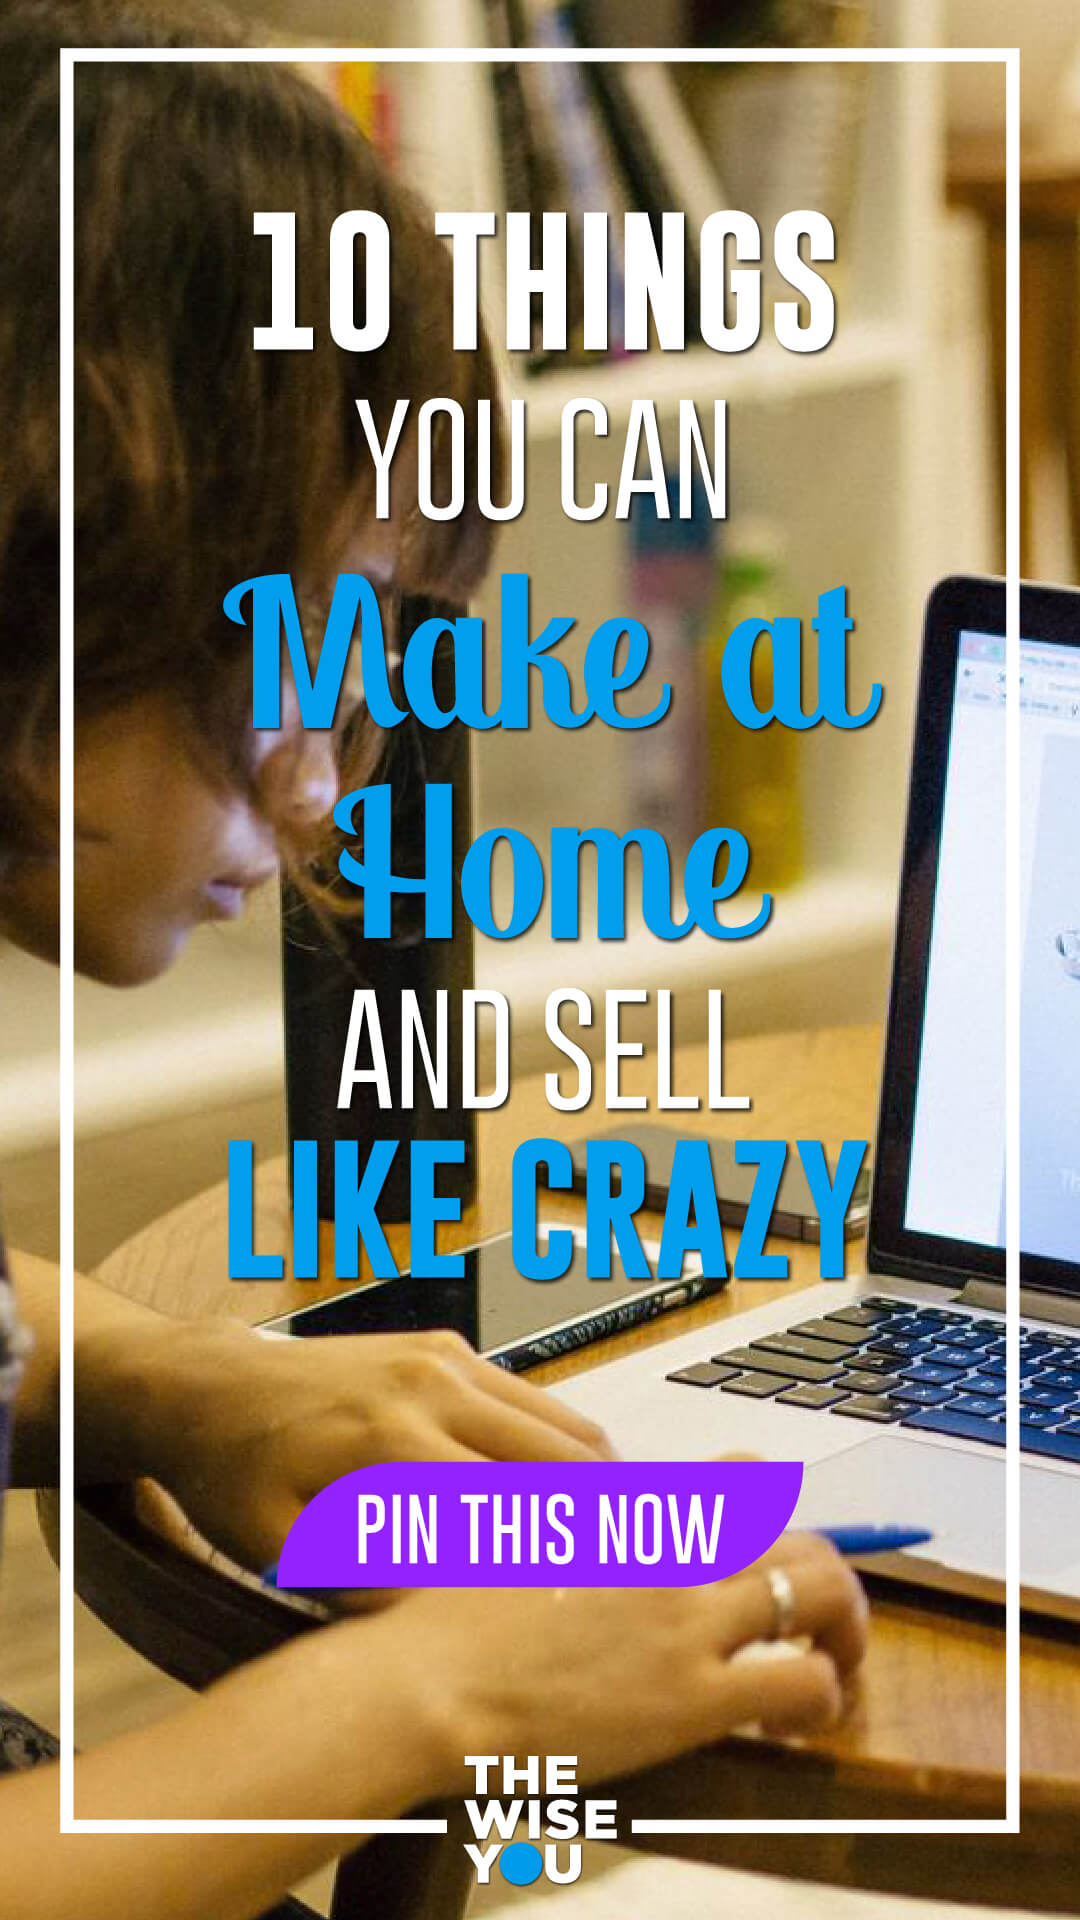 10 Things You Can Make at Home and Sell Like Crazy